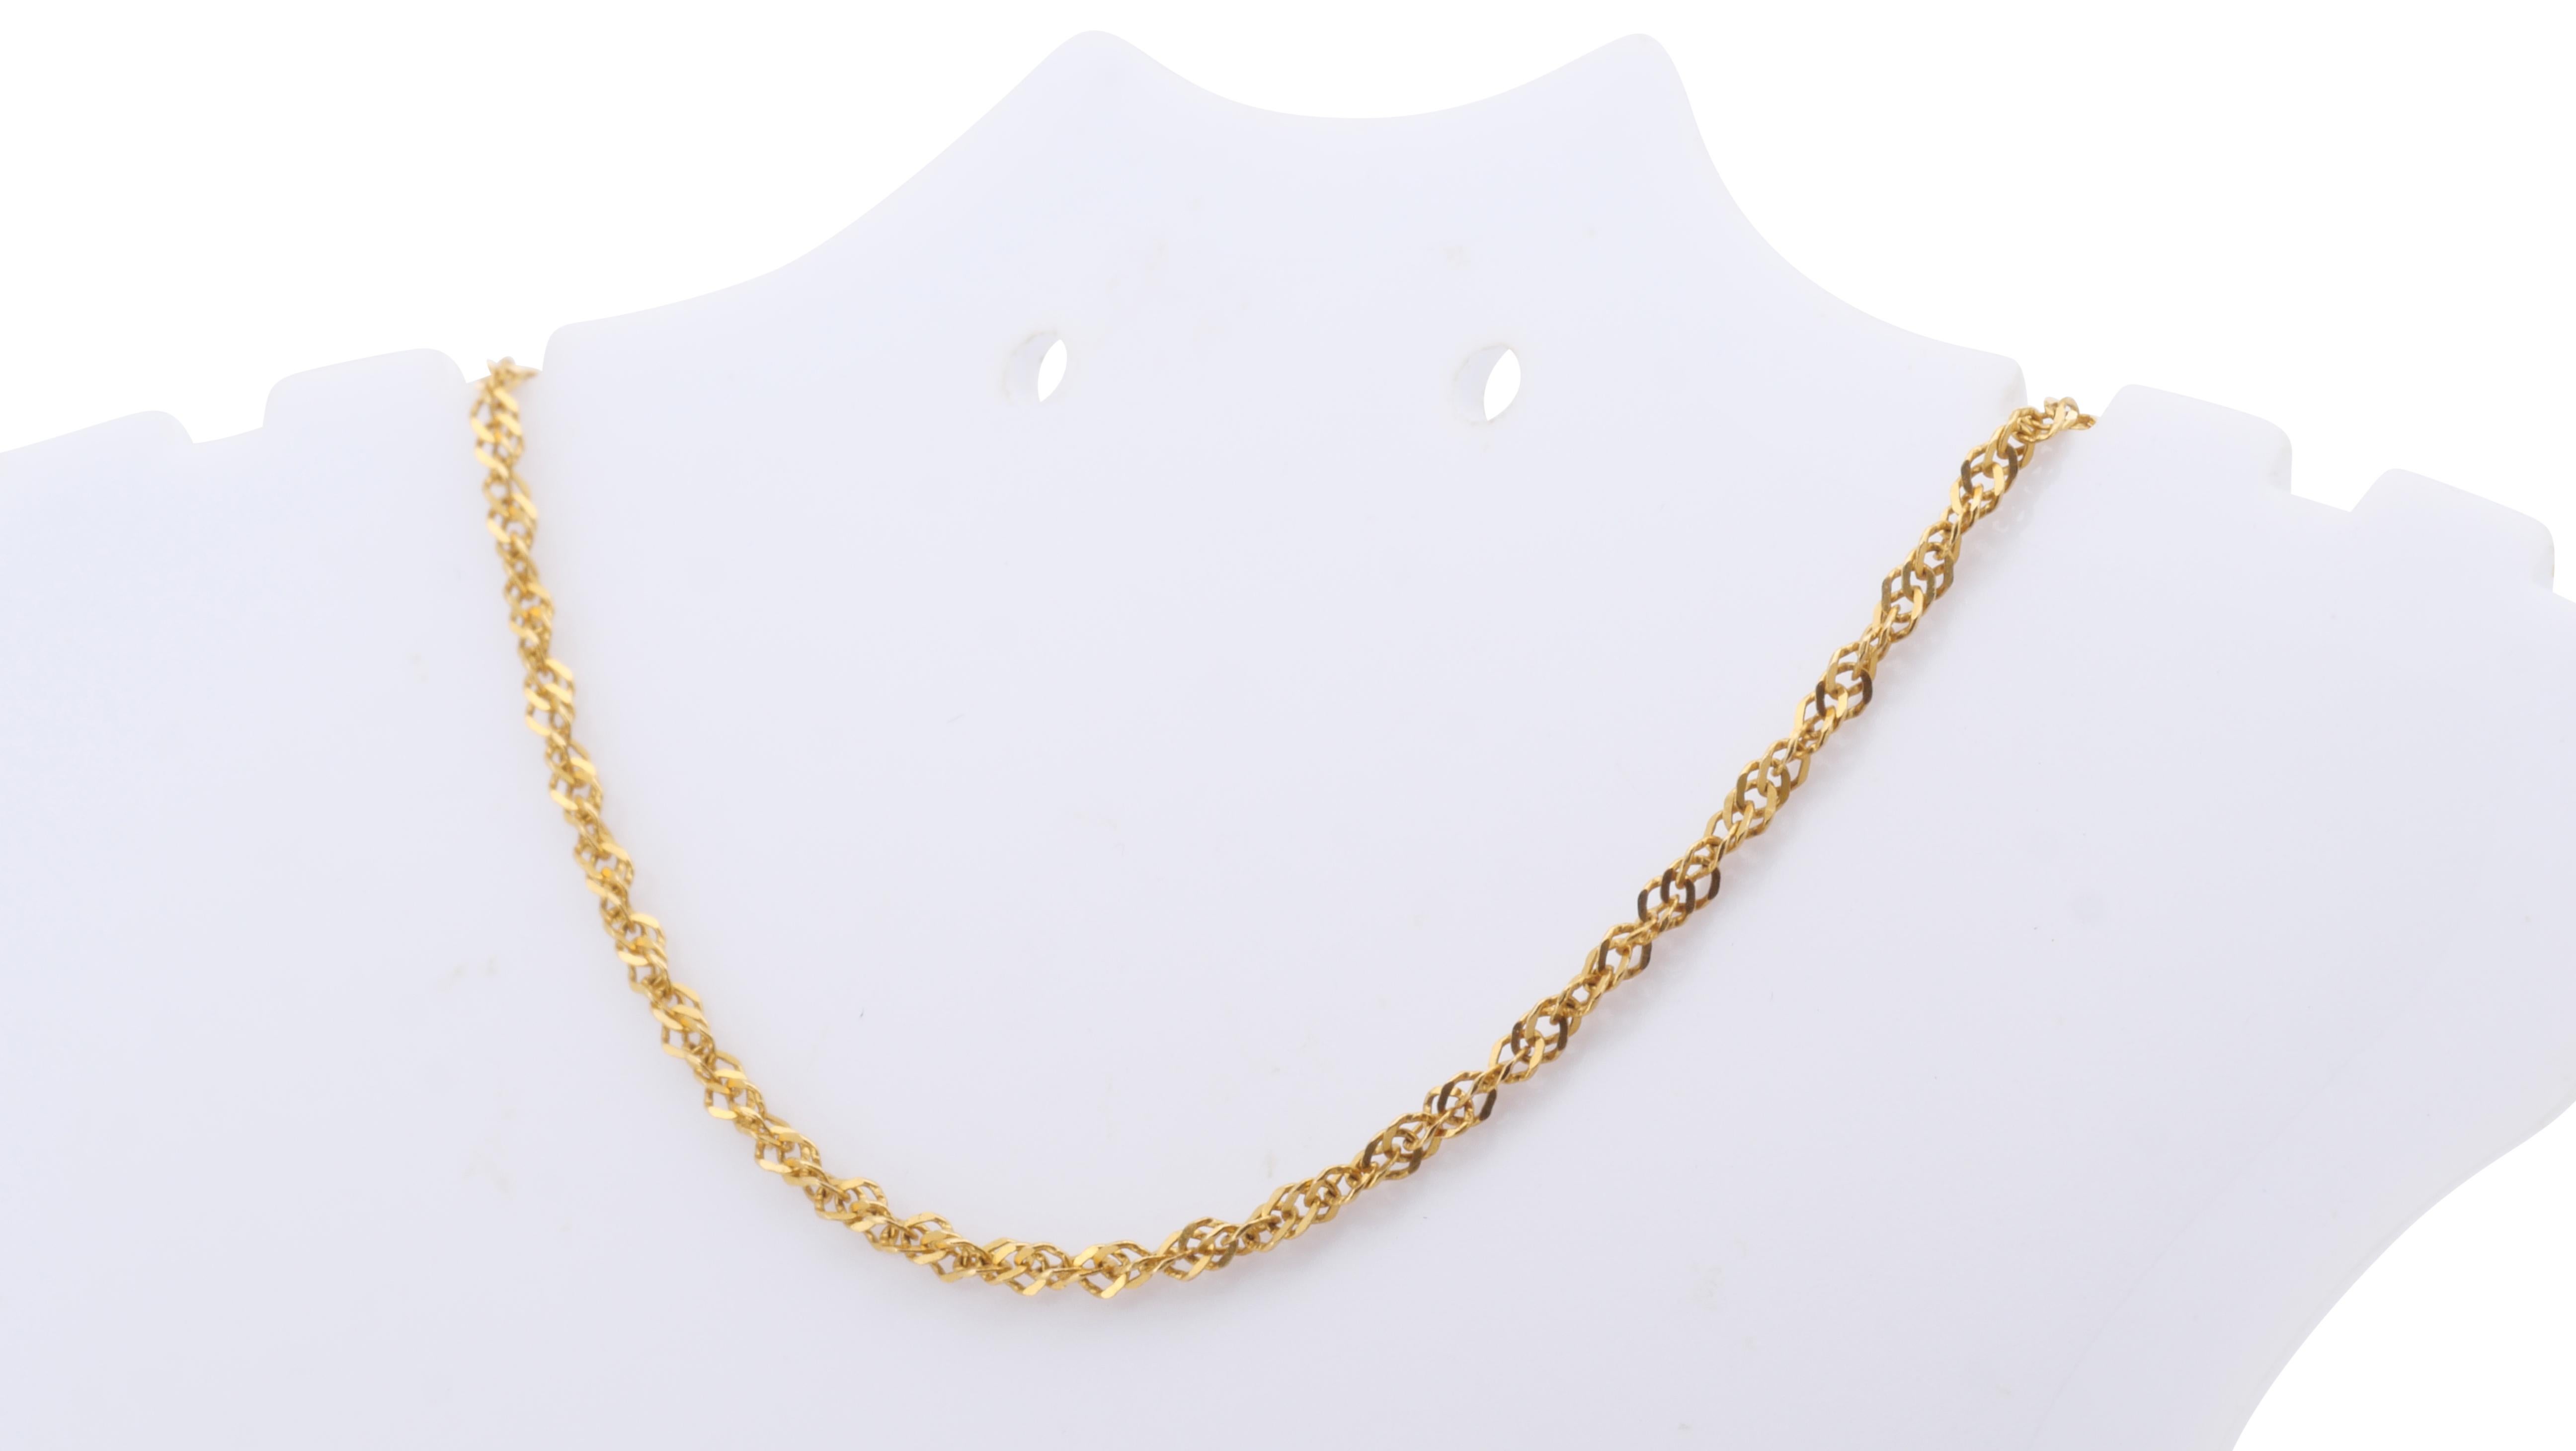 This chain is made of 14K yellow gold with a high quality polish. It comes with a nice jewelry box.

sku: C-SN-YG-186797

jewelry weight: 1.71
size: L-40cm T-1.5mm